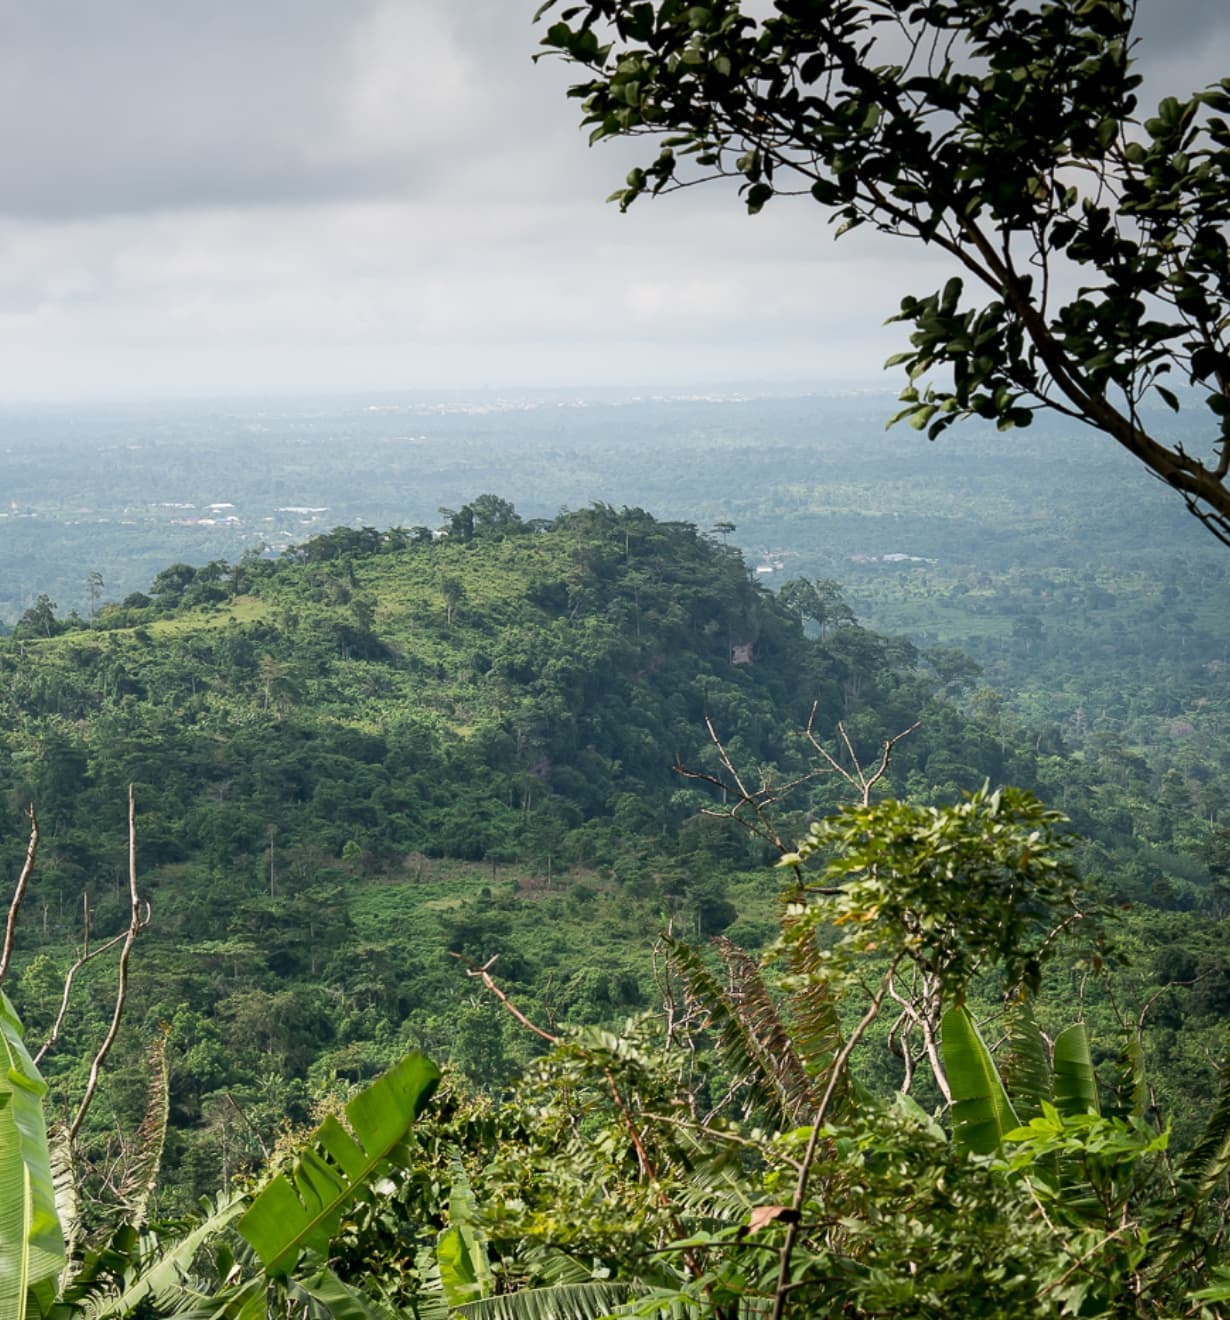 A view overlooking West Africa. Photo courtesy of Miro Forestry.